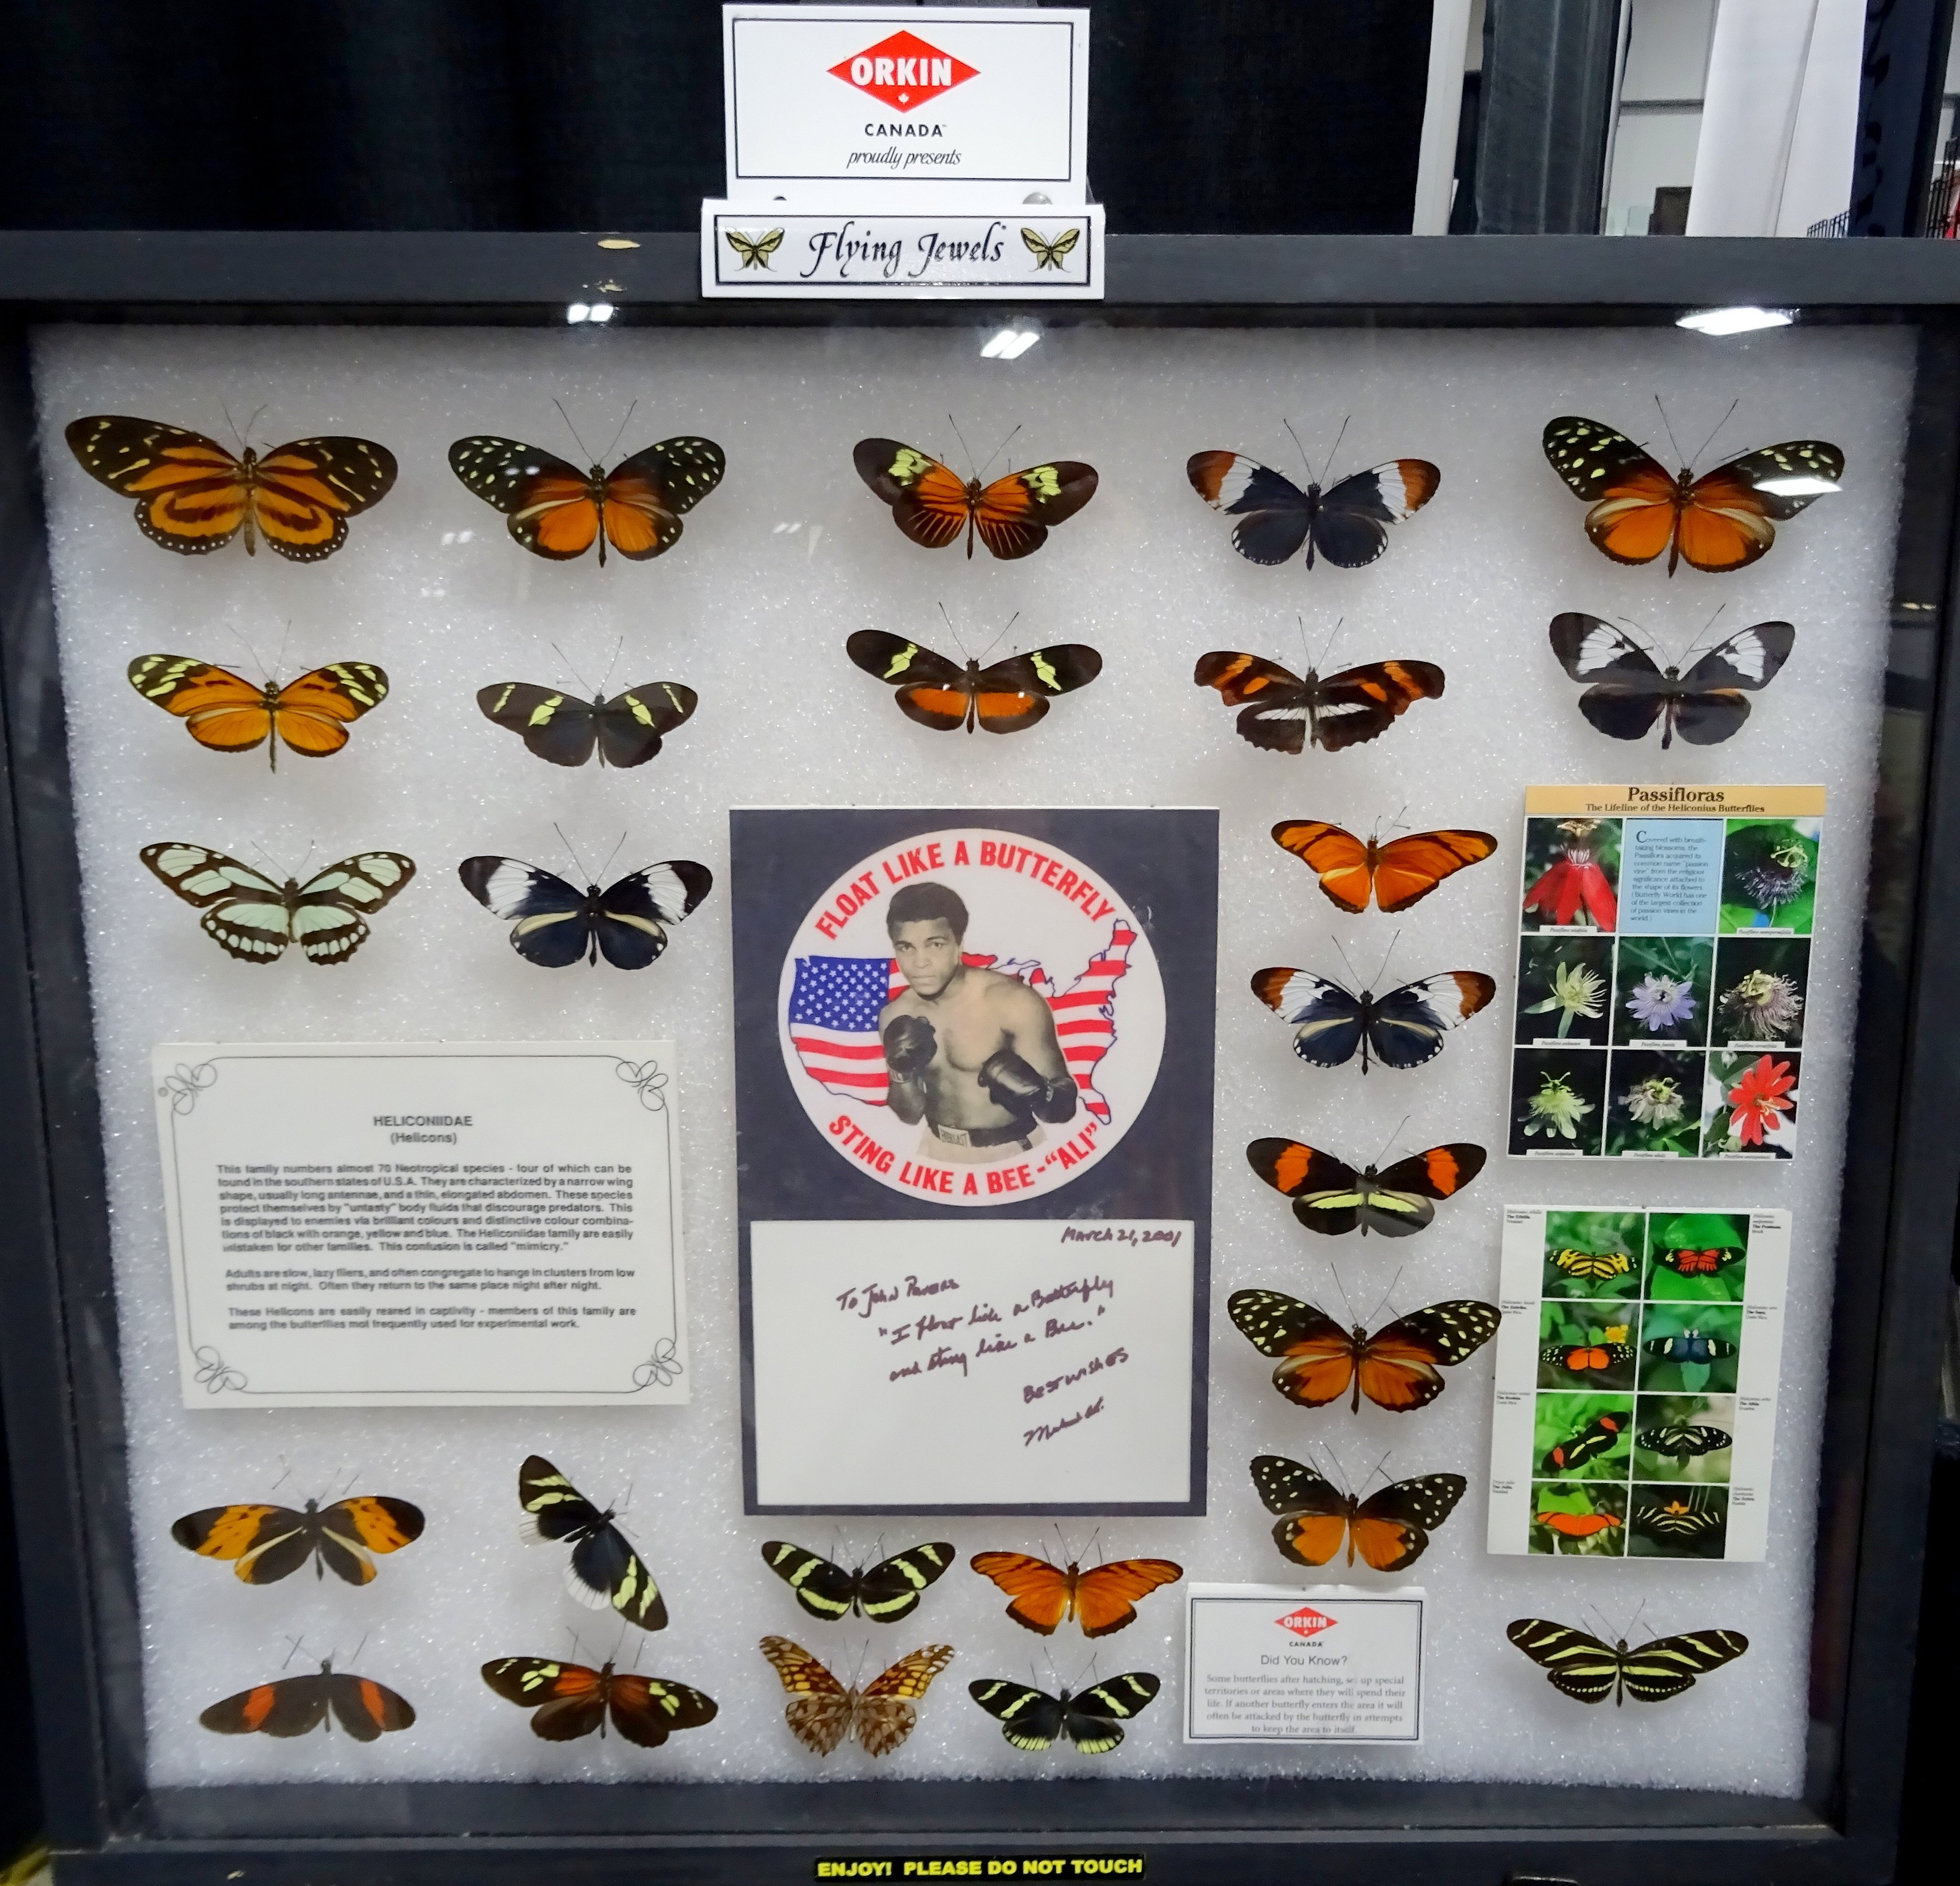 MuhammadAli quote at Butterfly Display by Orkin Canada, 15-17 April 2016